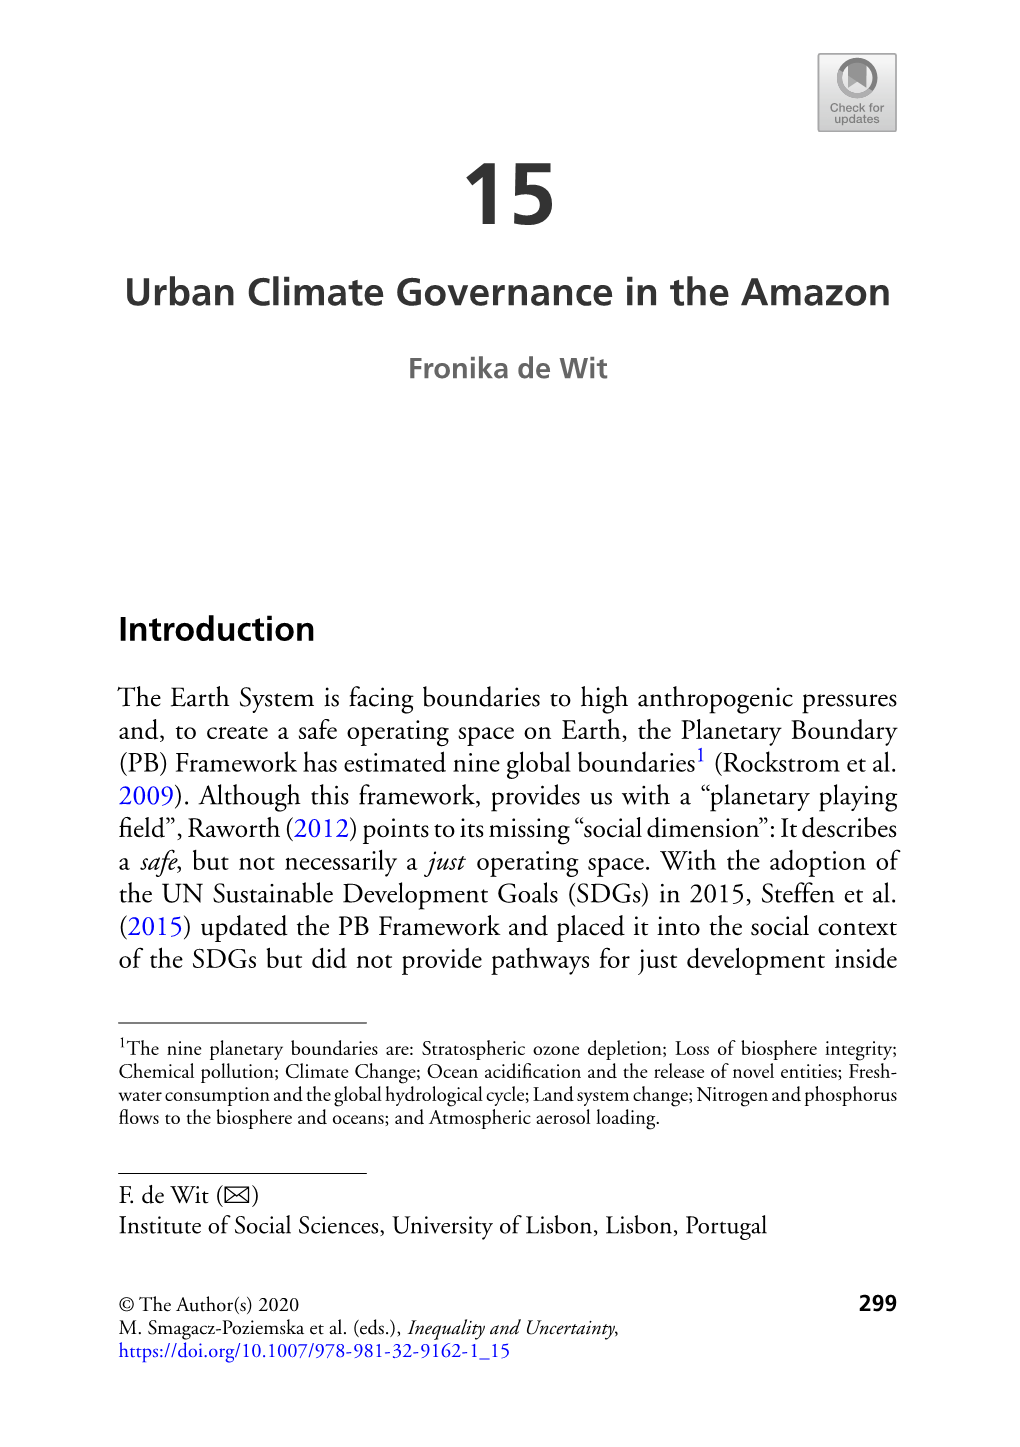 Urban Climate Governance in the Amazon